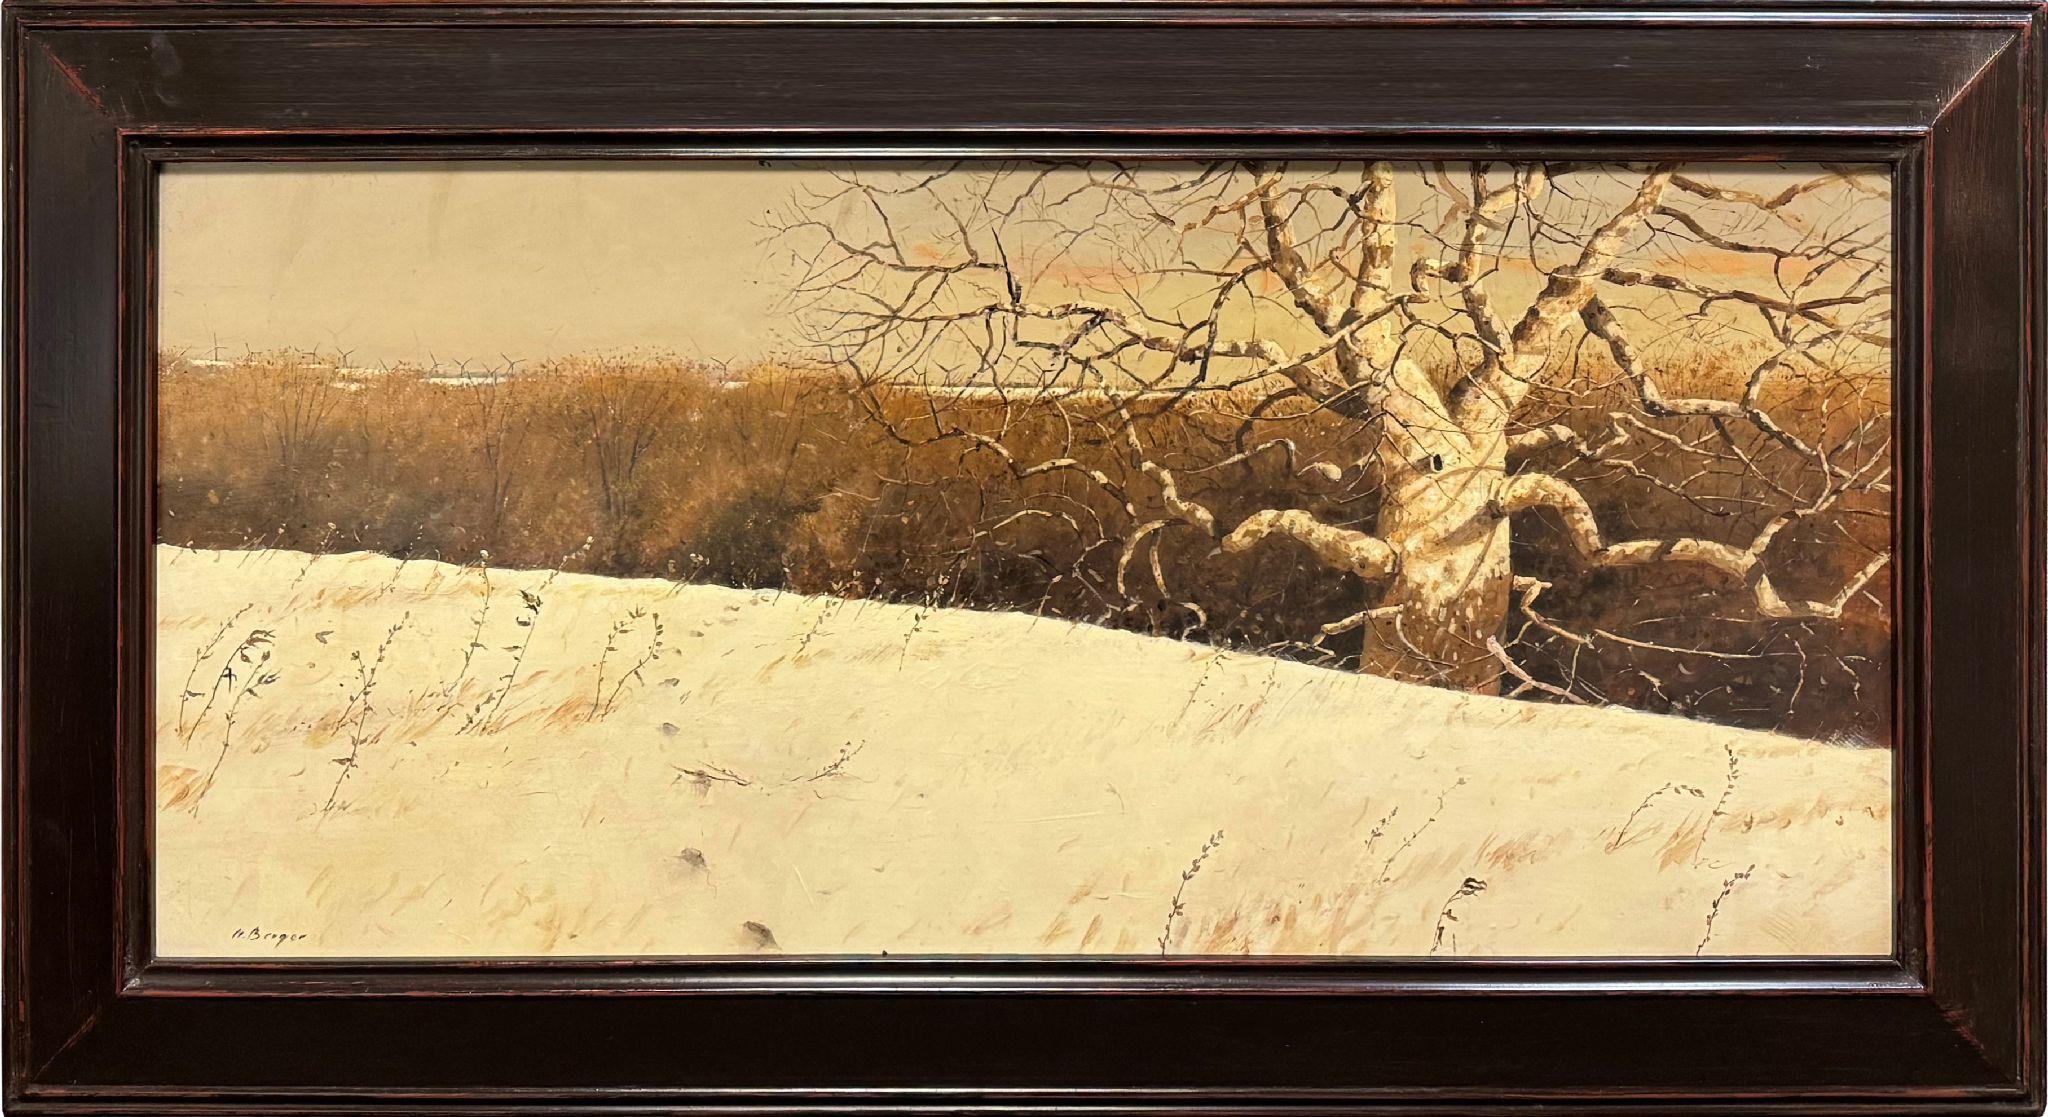 Distant Hills - Painting by Nicholas Berger